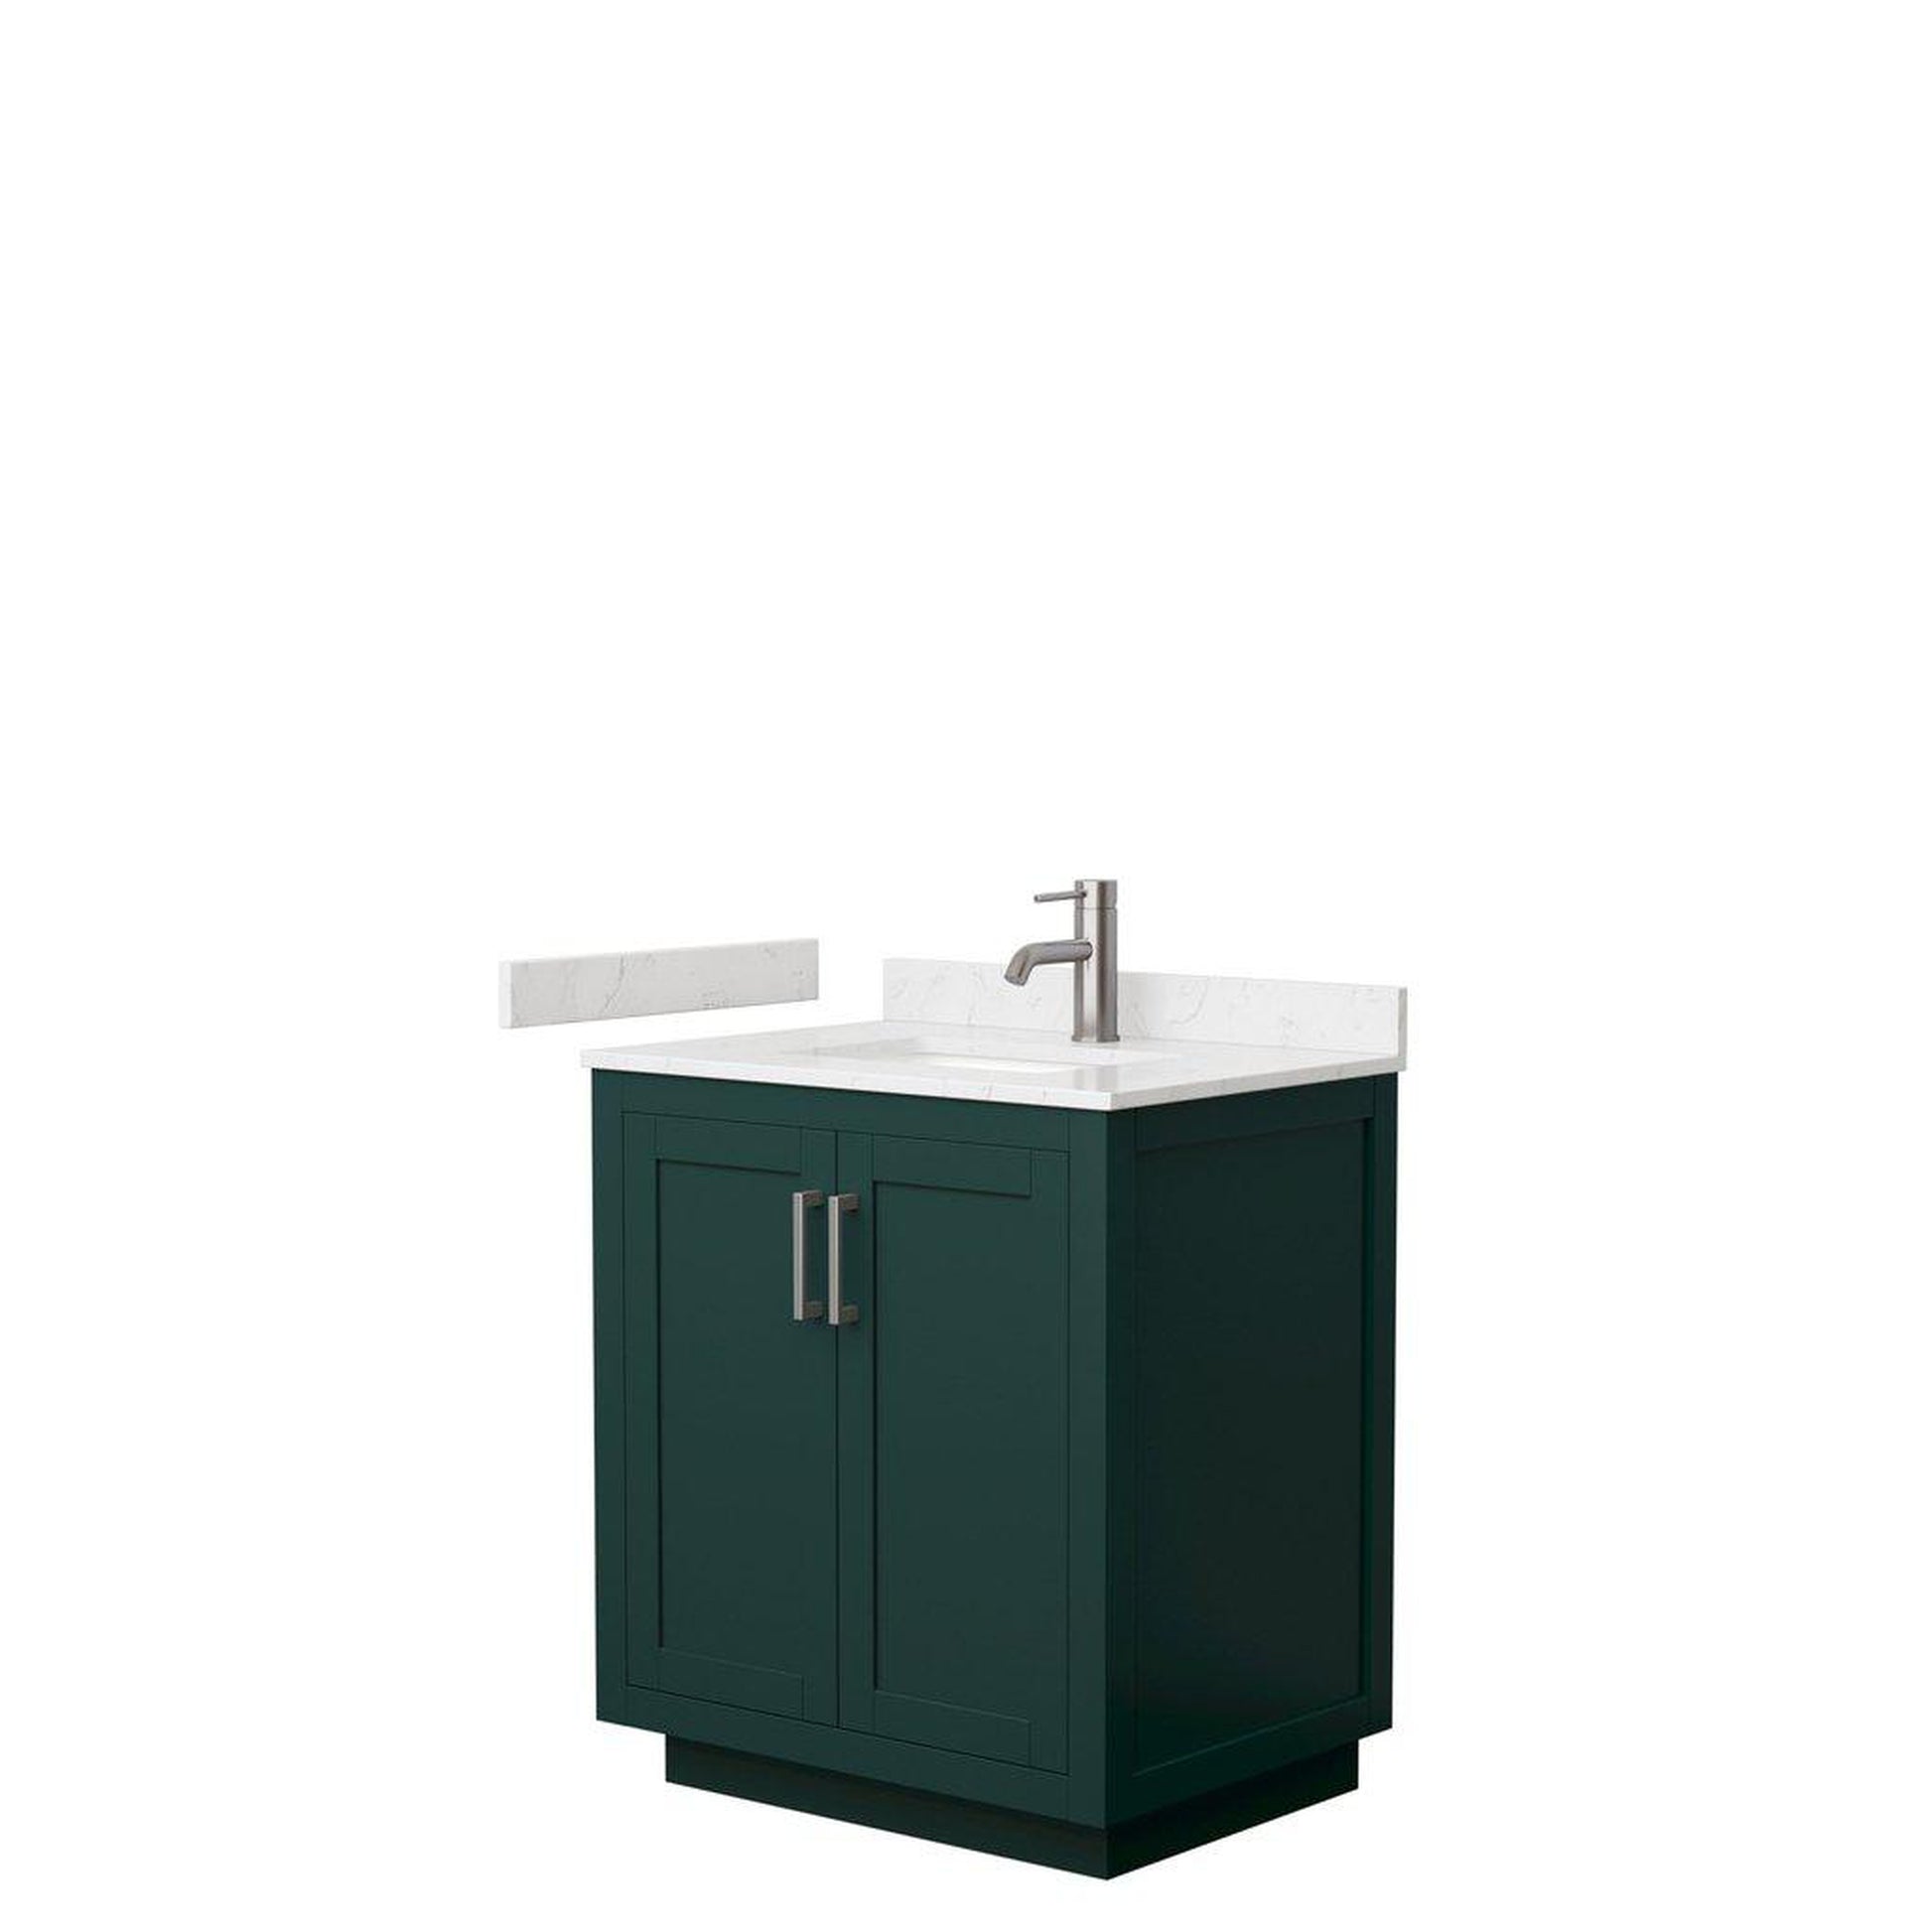 Wyndham Collection Miranda 30" Single Bathroom Green Vanity Set With Light-Vein Carrara Cultured Marble Countertop, Undermount Square Sink, And Brushed Nickel Trim